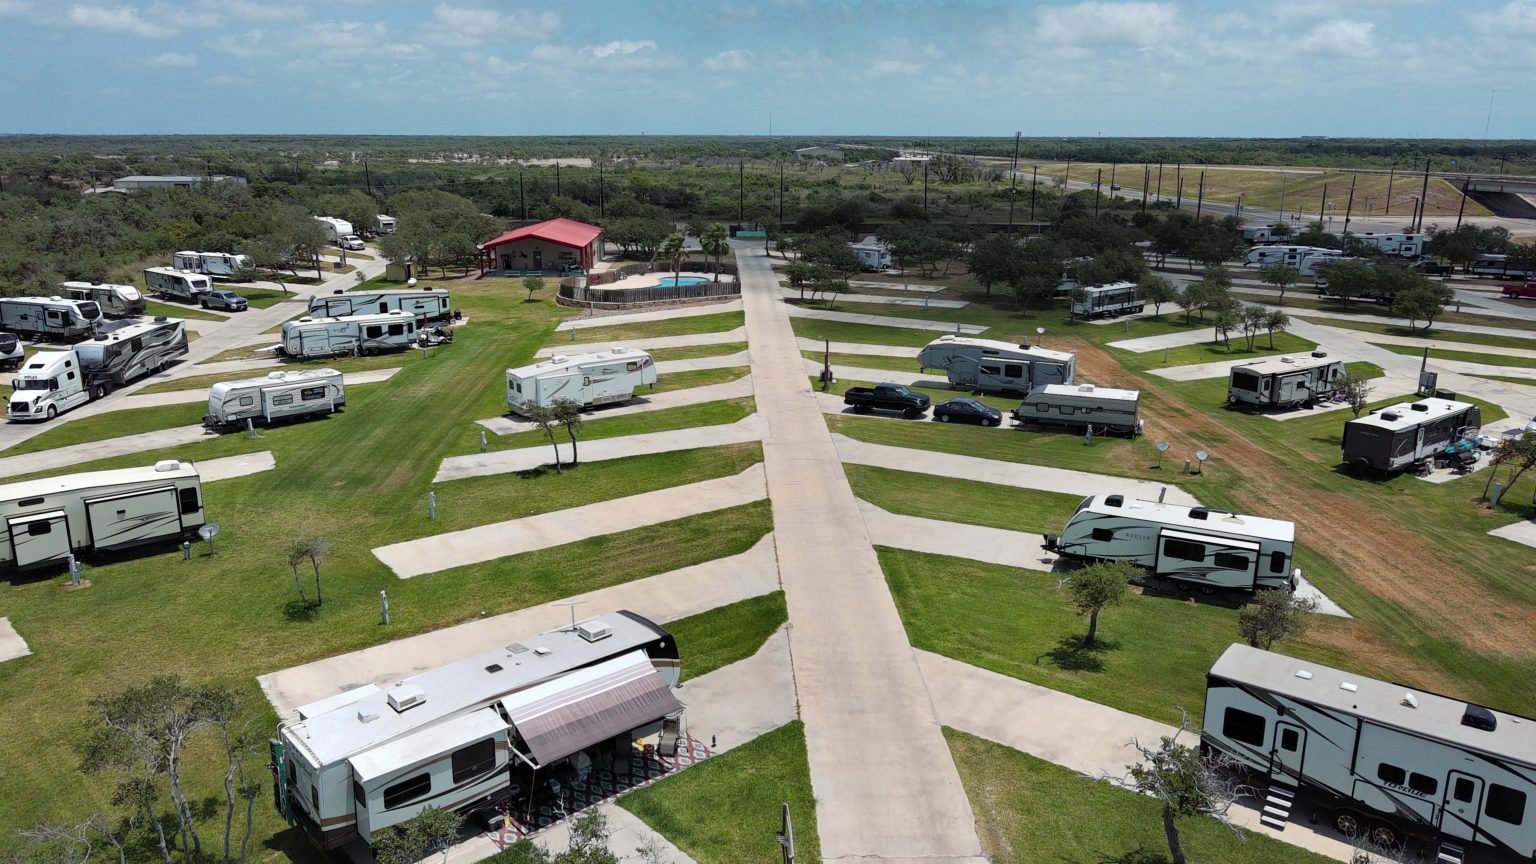 RVs in concrete spots with ocean horizon in background.